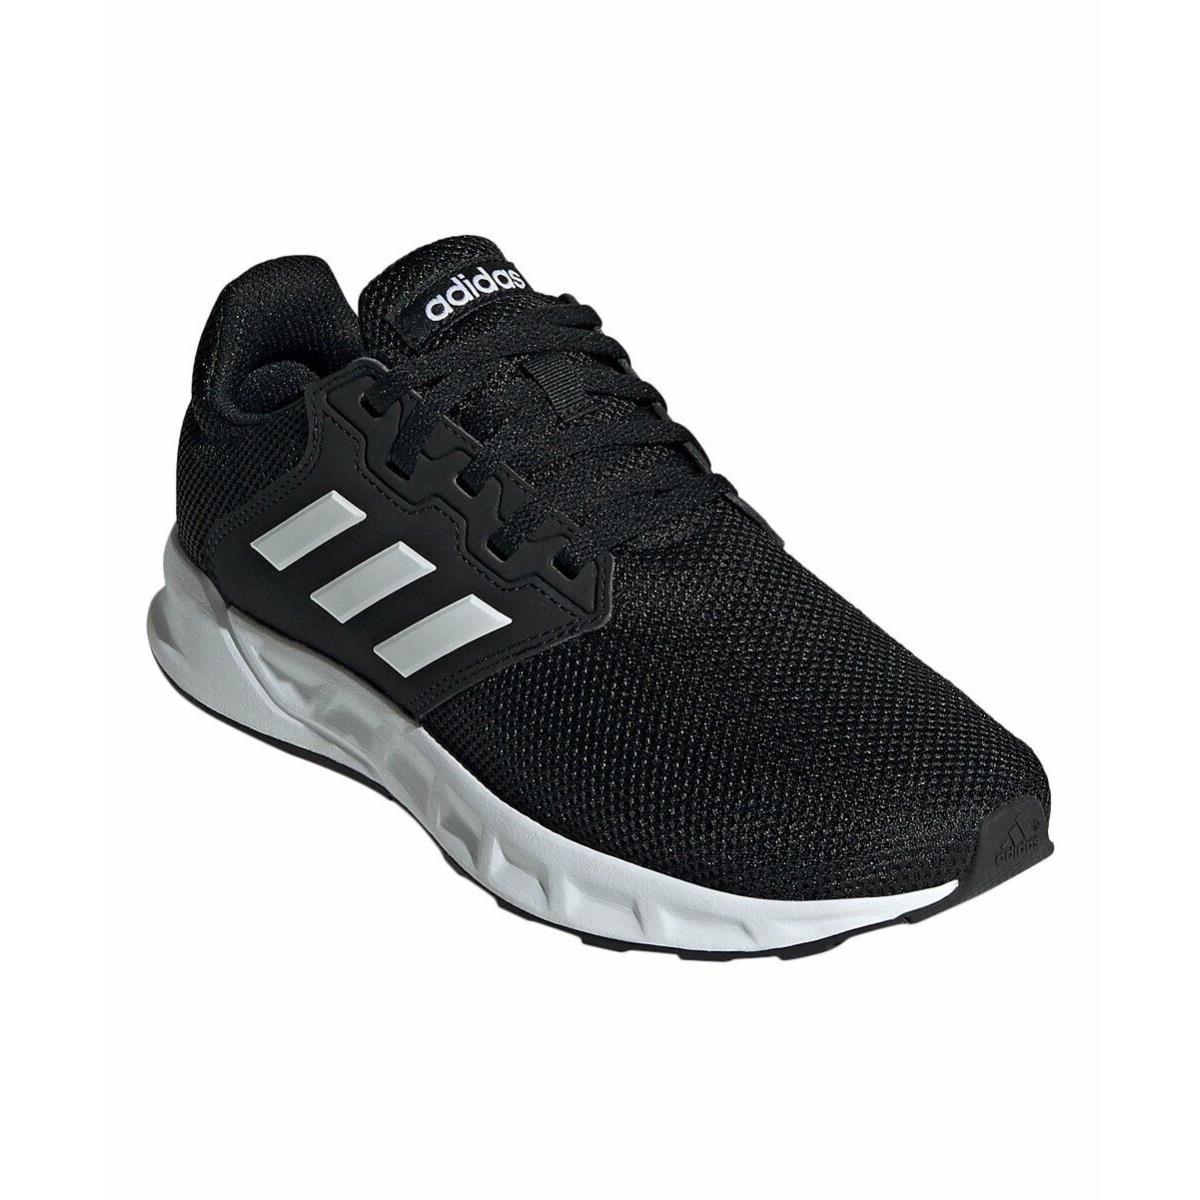 Adidas Course A Pied Running Shoes Women`s Black/white 6M Showtheway | 692740027678 - shoes Course - Black | SporTipTop